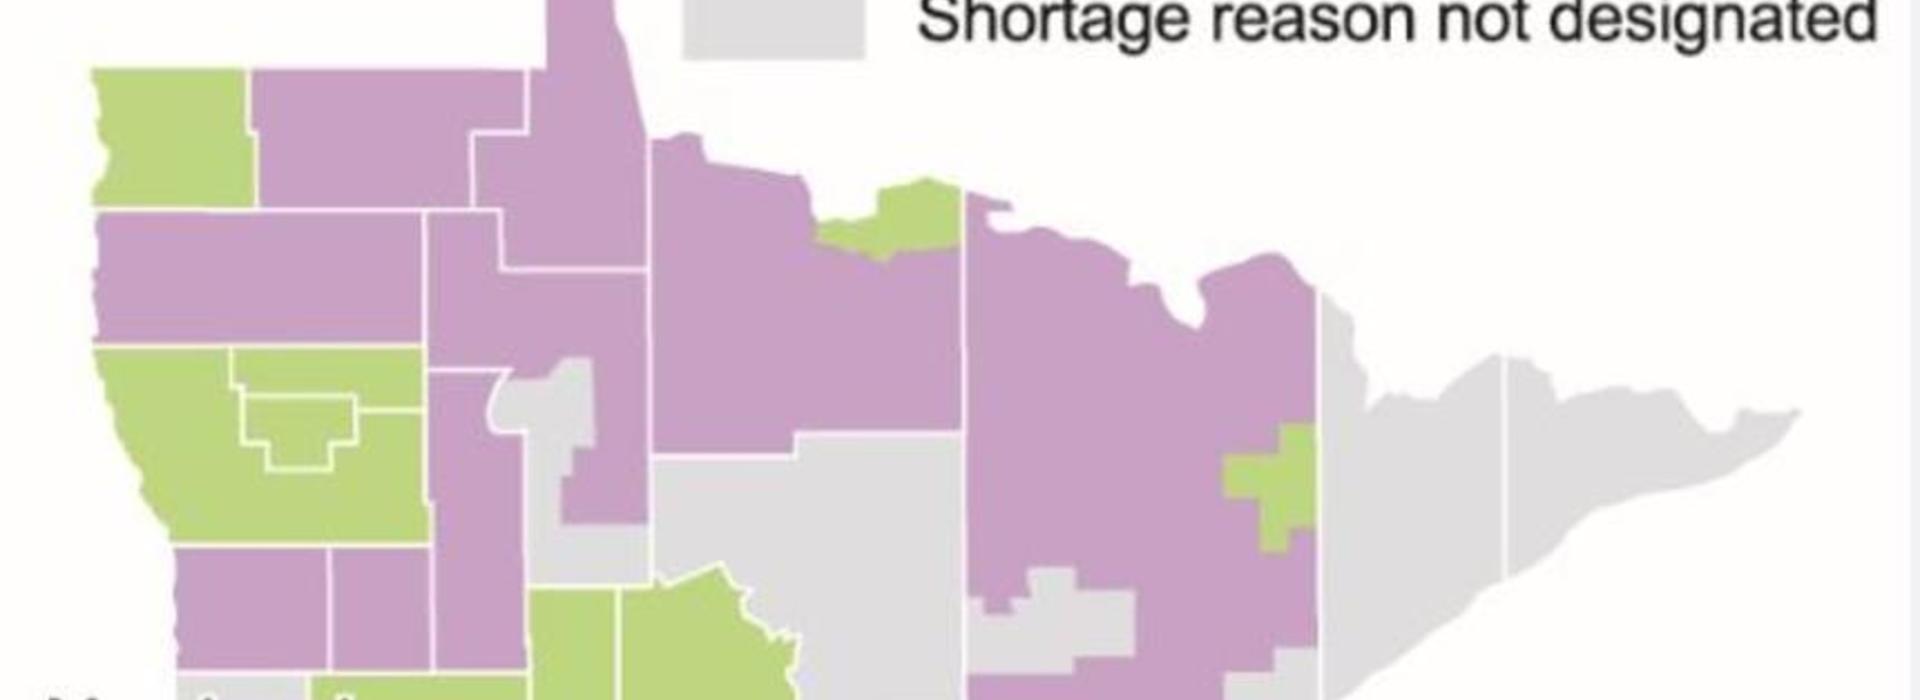 Rural Minnesota struggles when competing for doctors